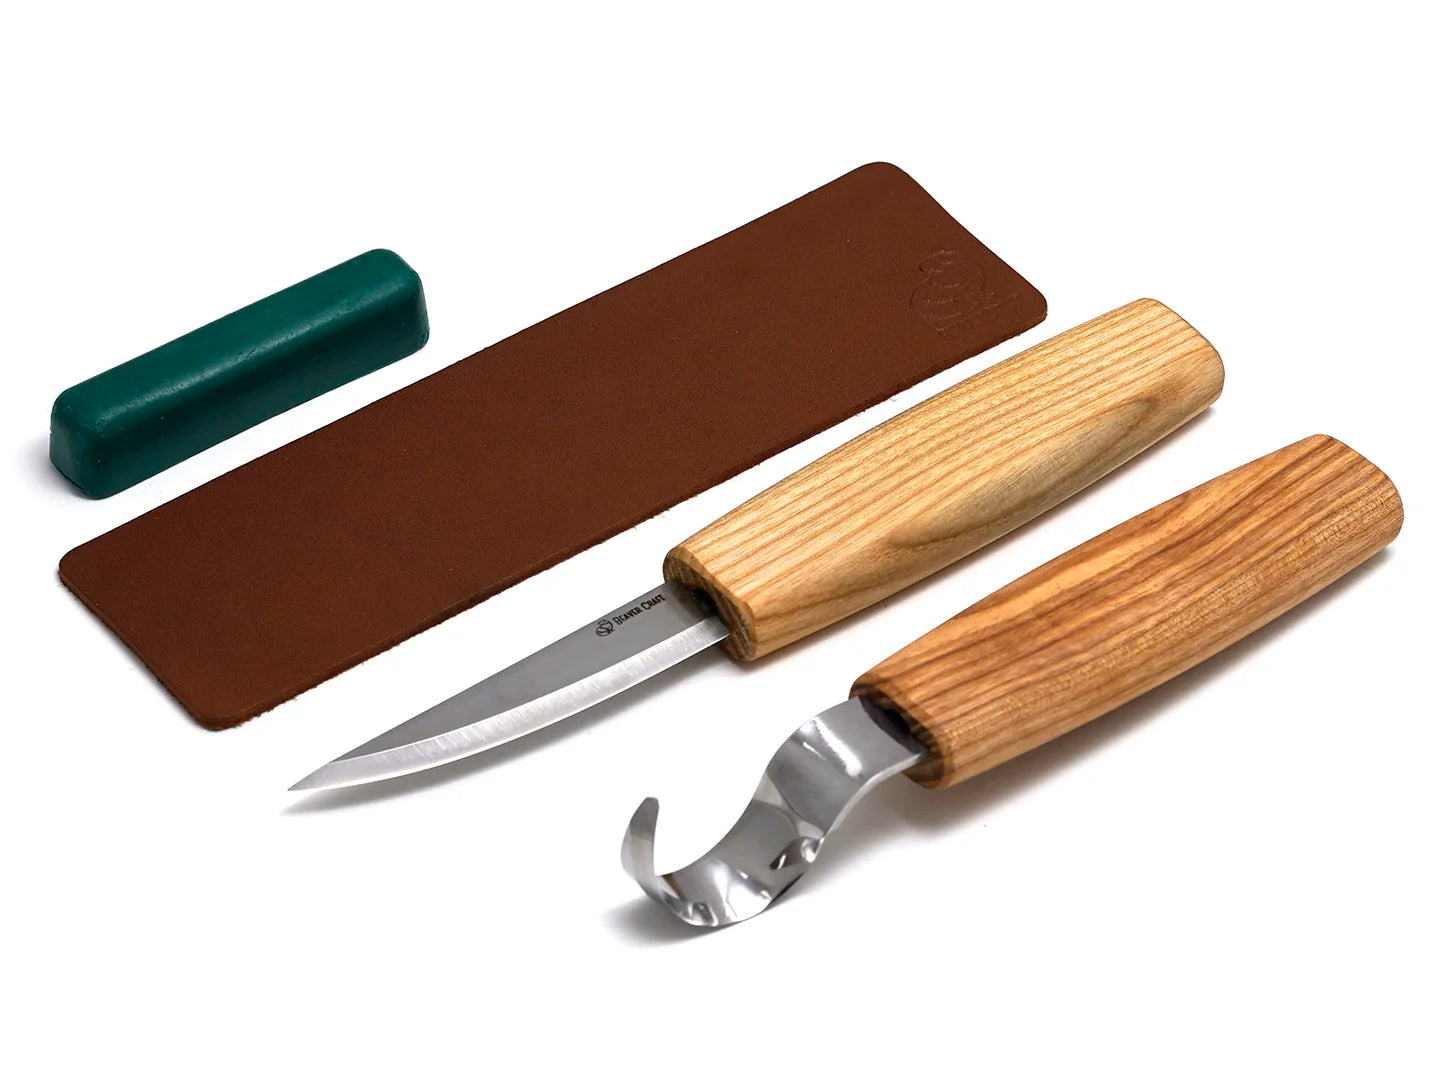 S03 - Spoon Carving Tool Set for Beginners